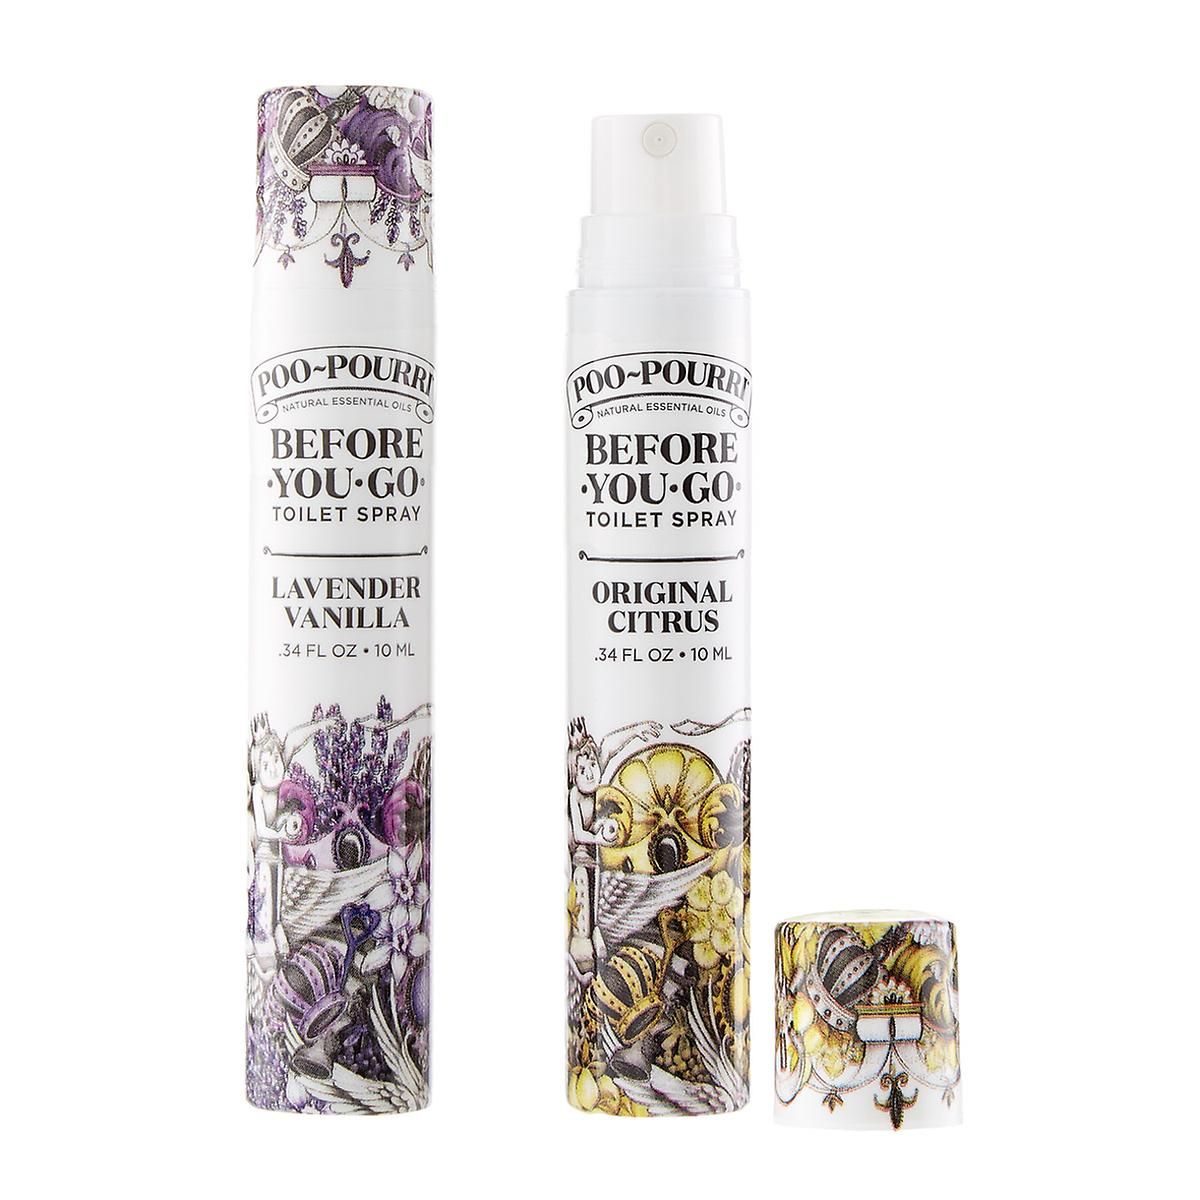 10ml Poo-Pourri Sprayers | The Container Store